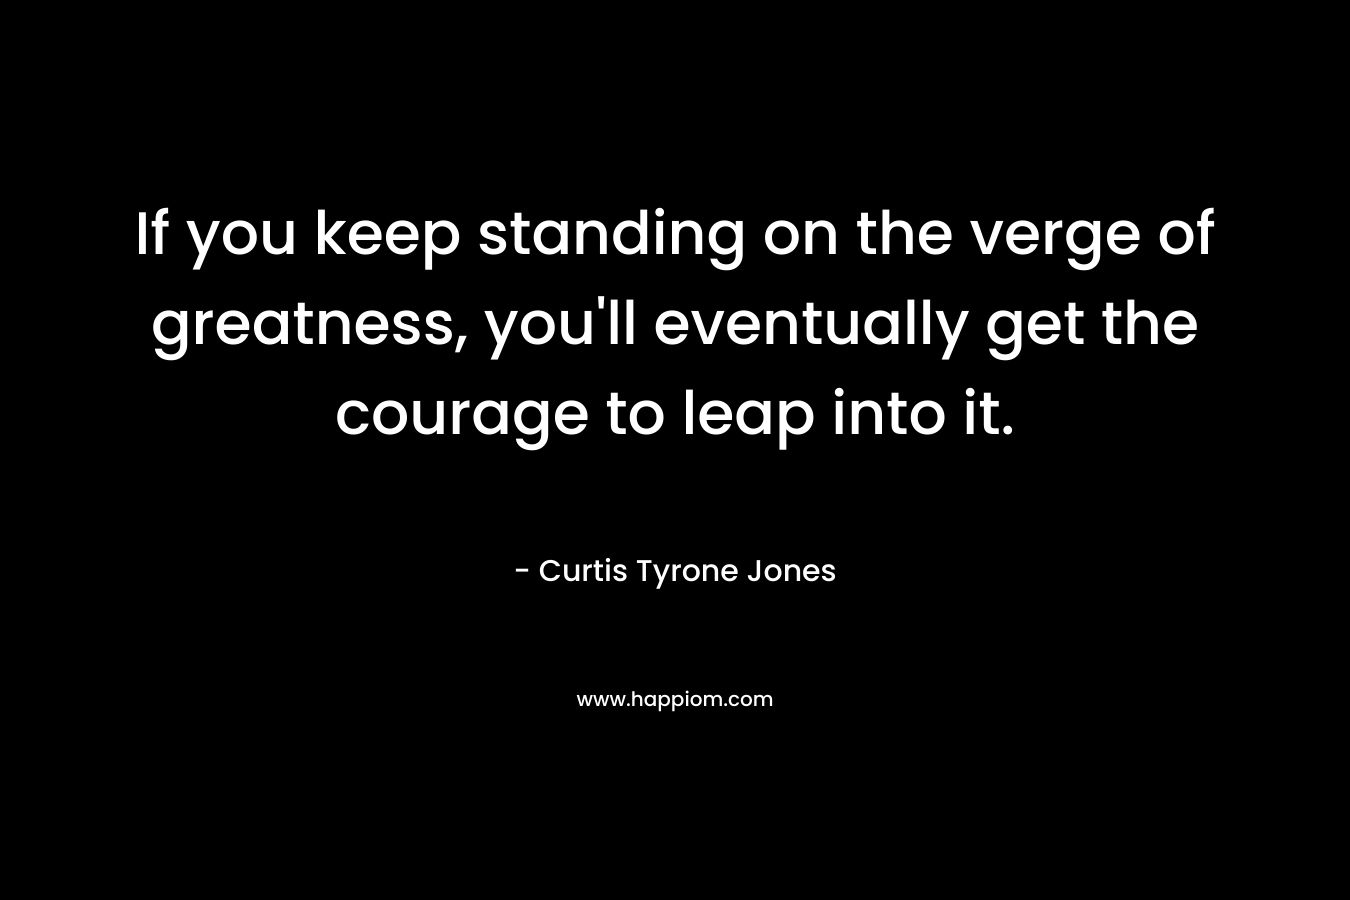 If you keep standing on the verge of greatness, you'll eventually get the courage to leap into it.